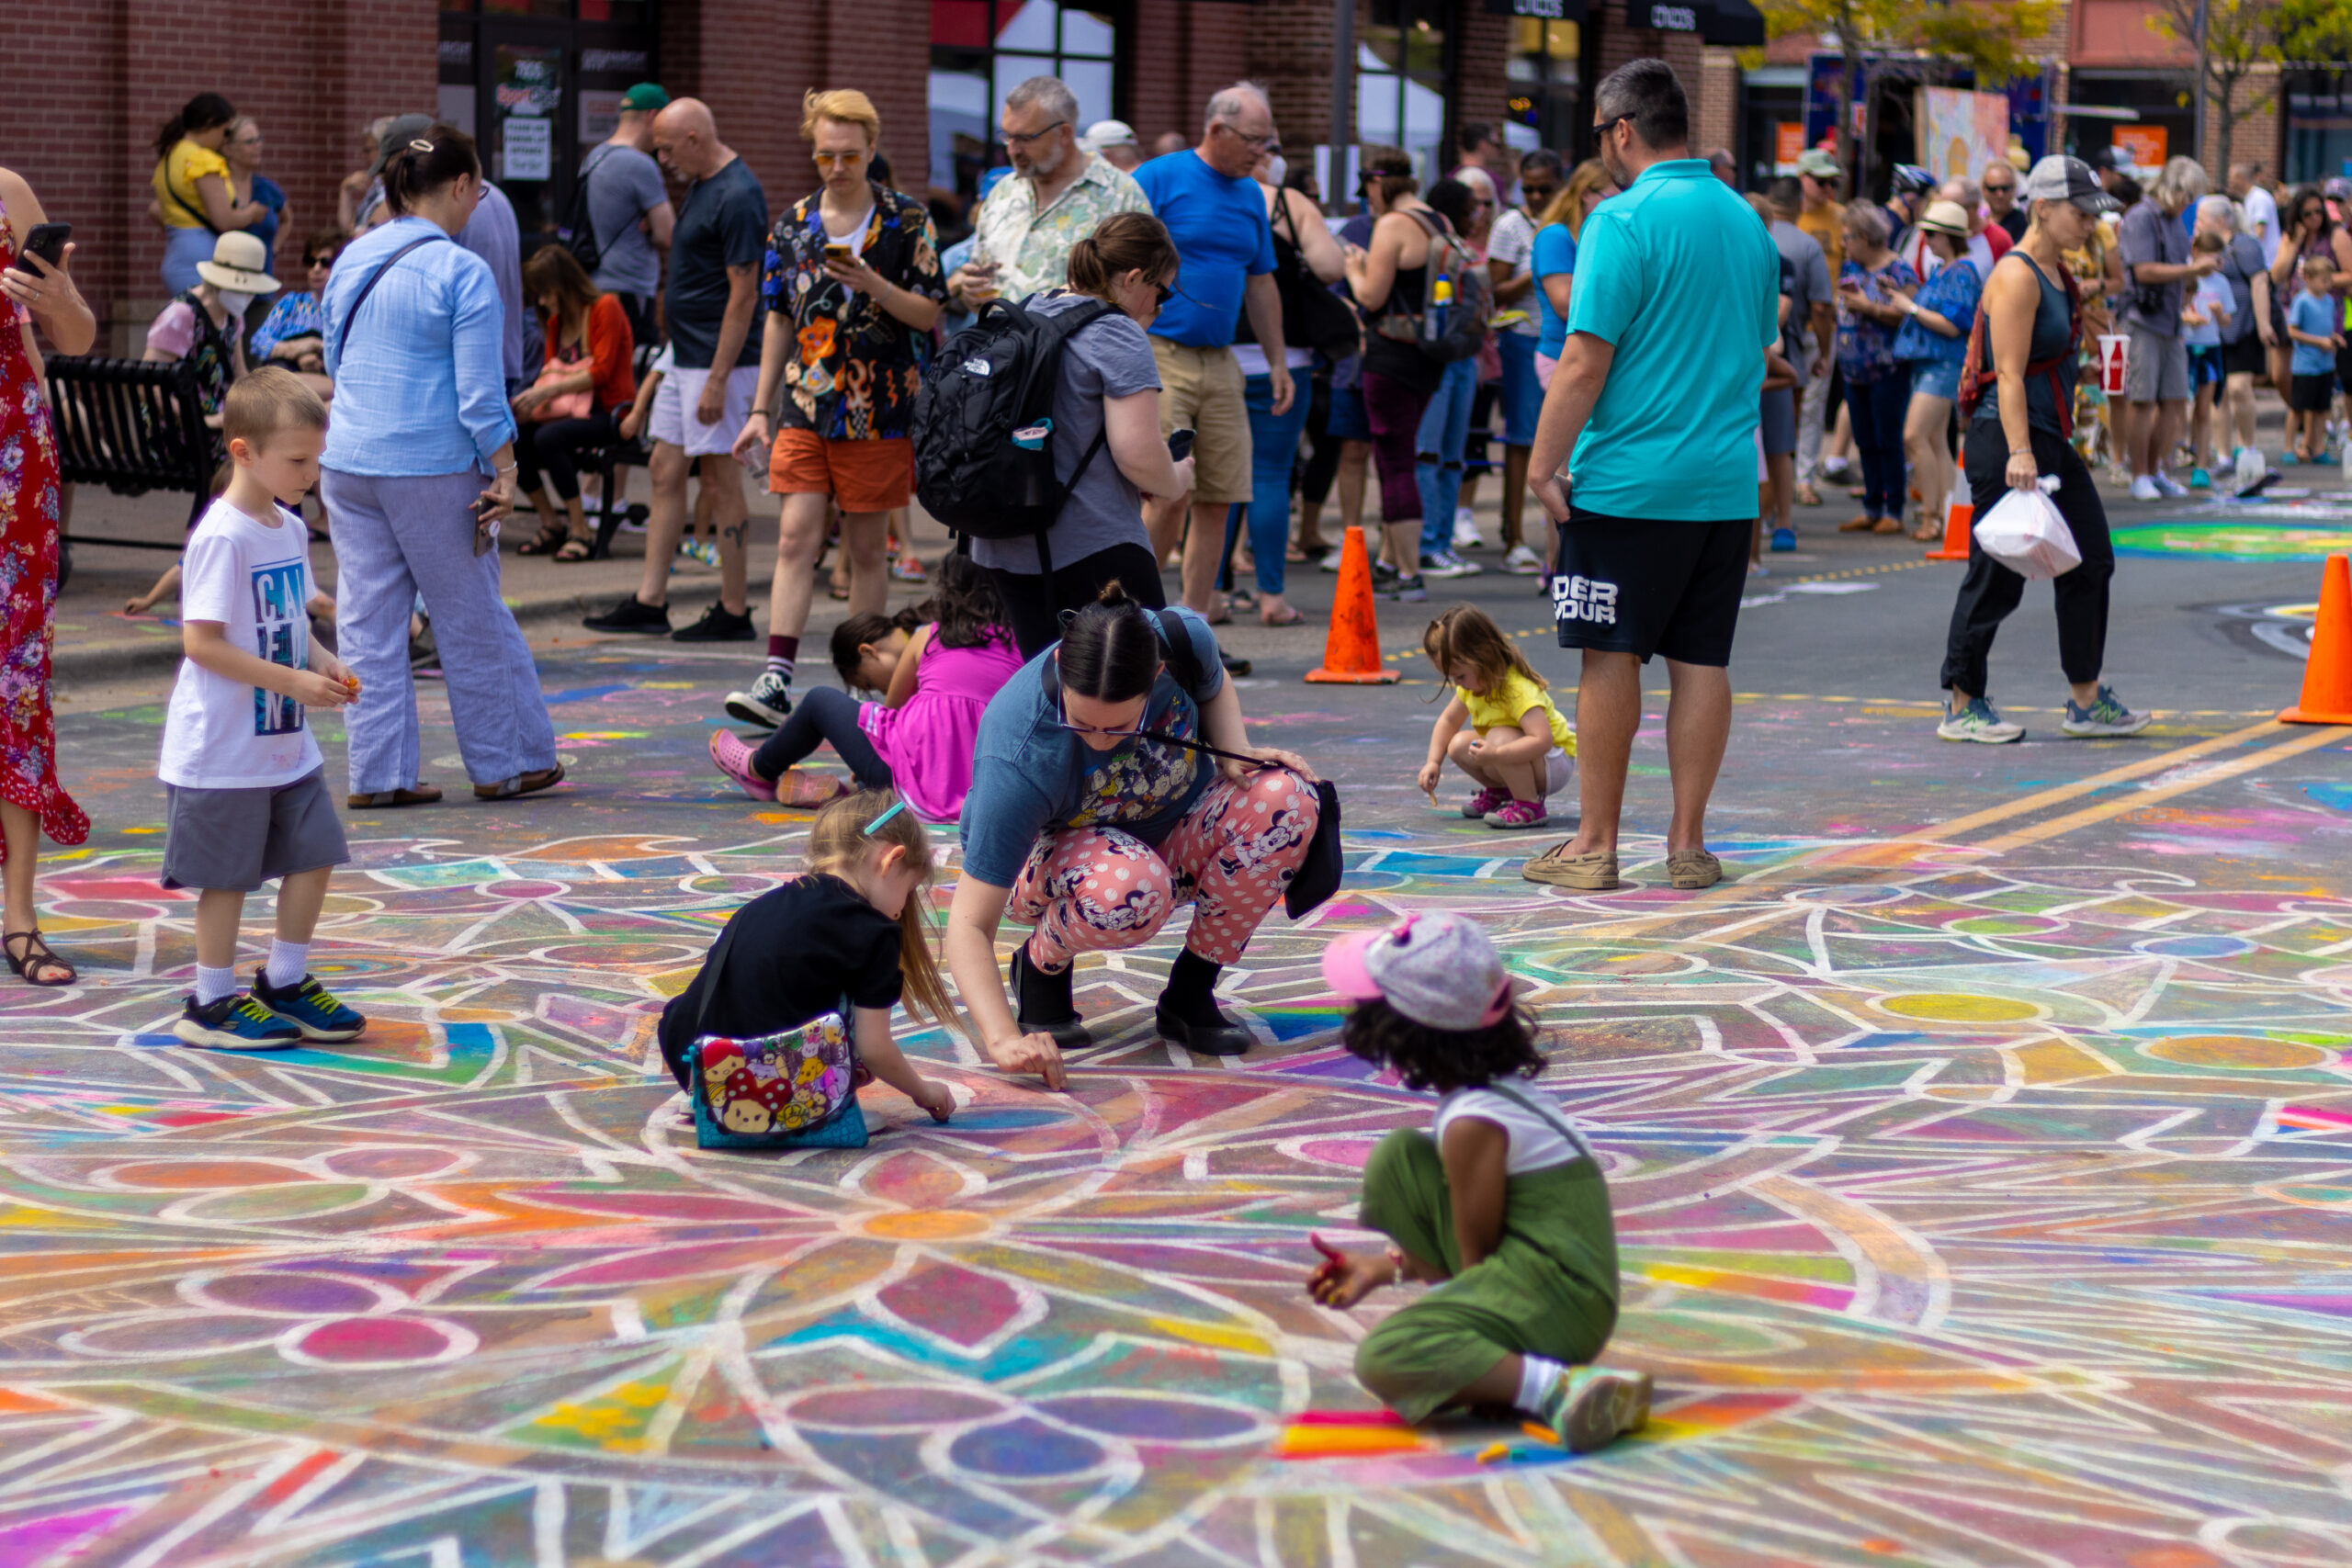 This is one of the many fun Mandalas that have been created to allow the public to join in and chalk.